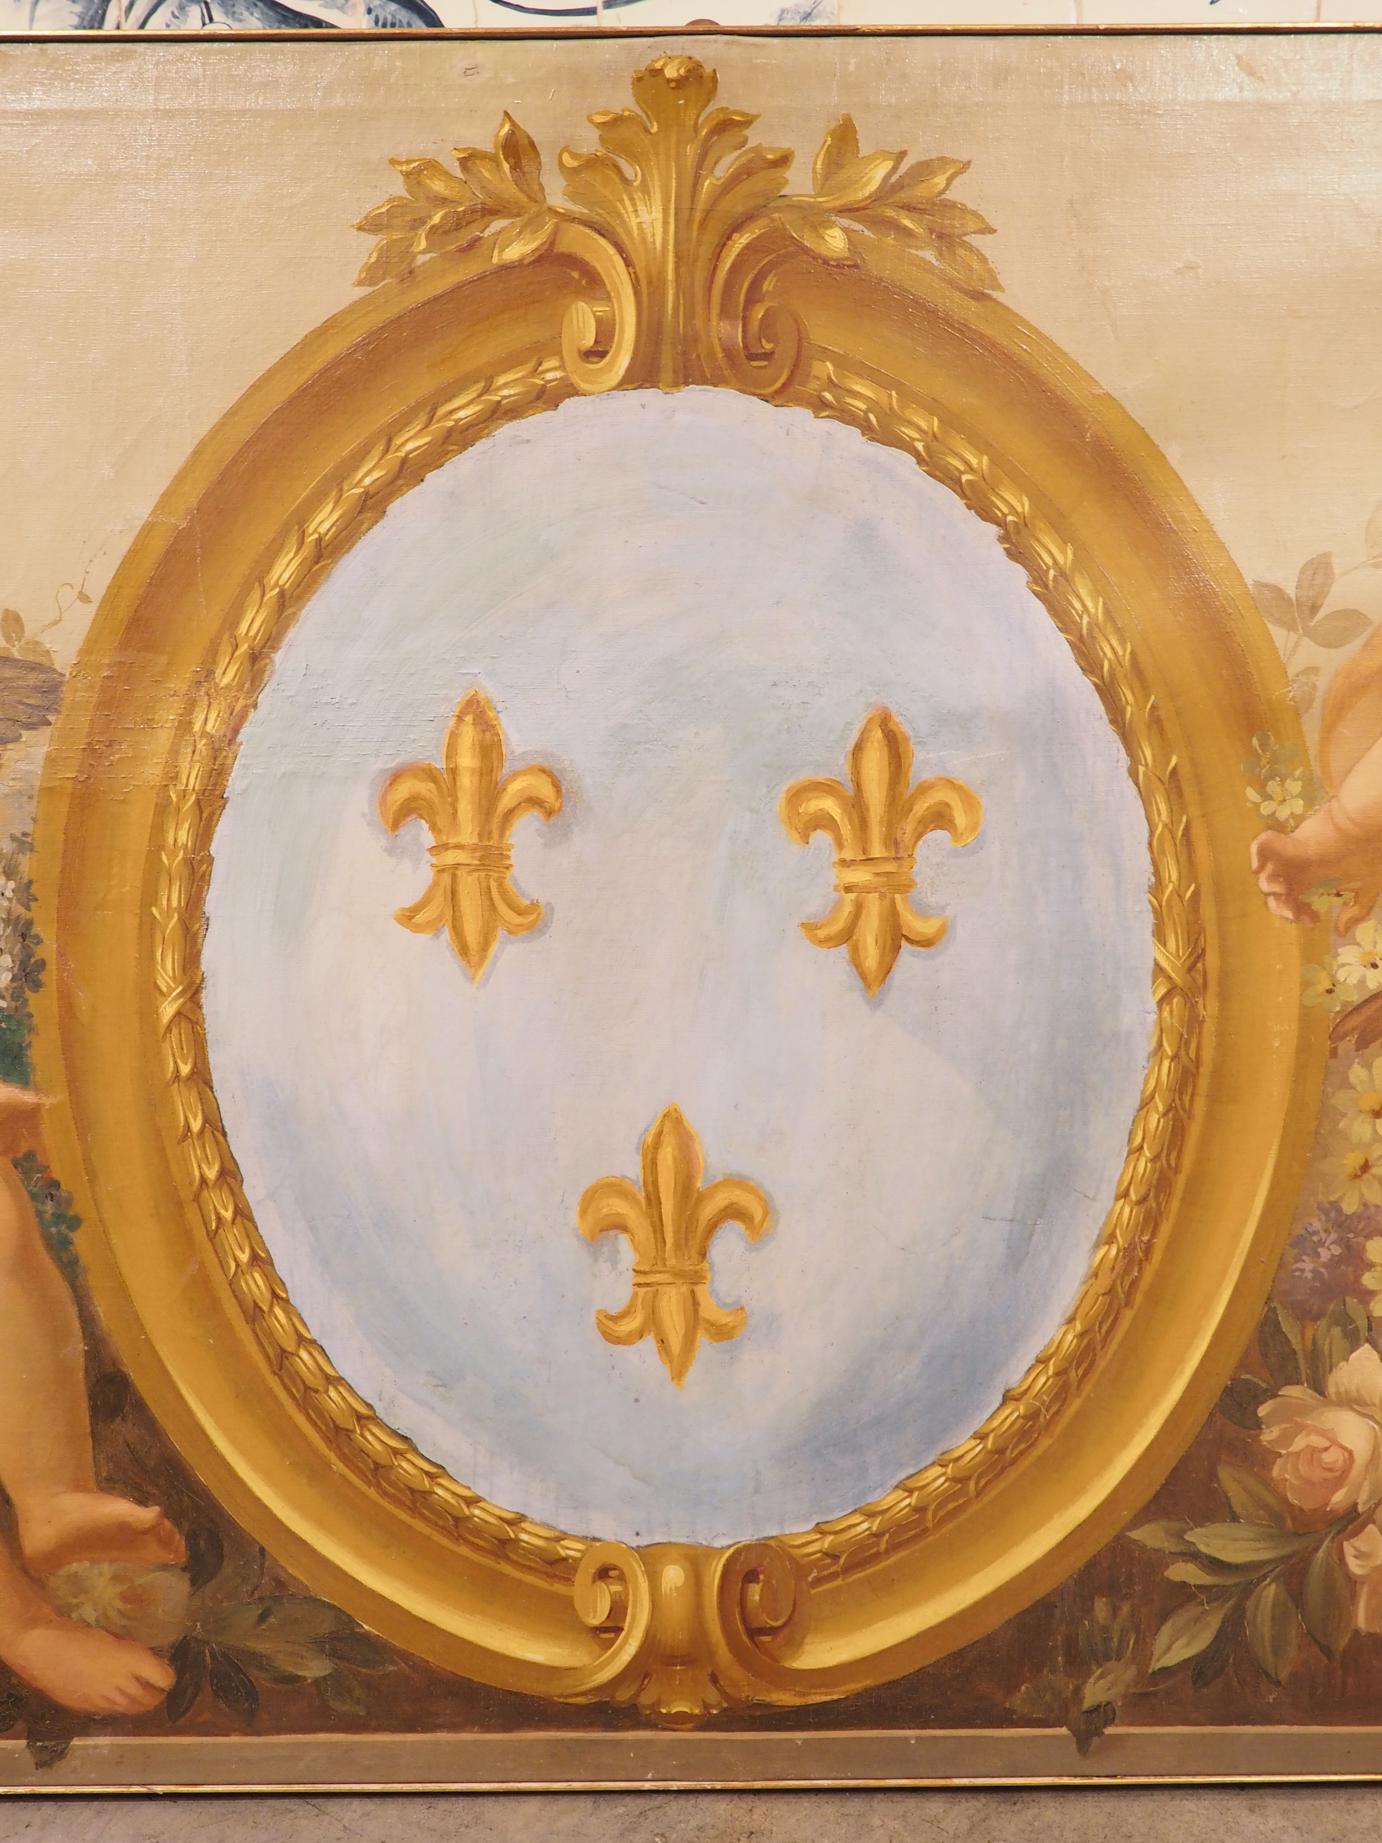 C. 1840 French Boiserie Painting, The Allegory of Spring and The